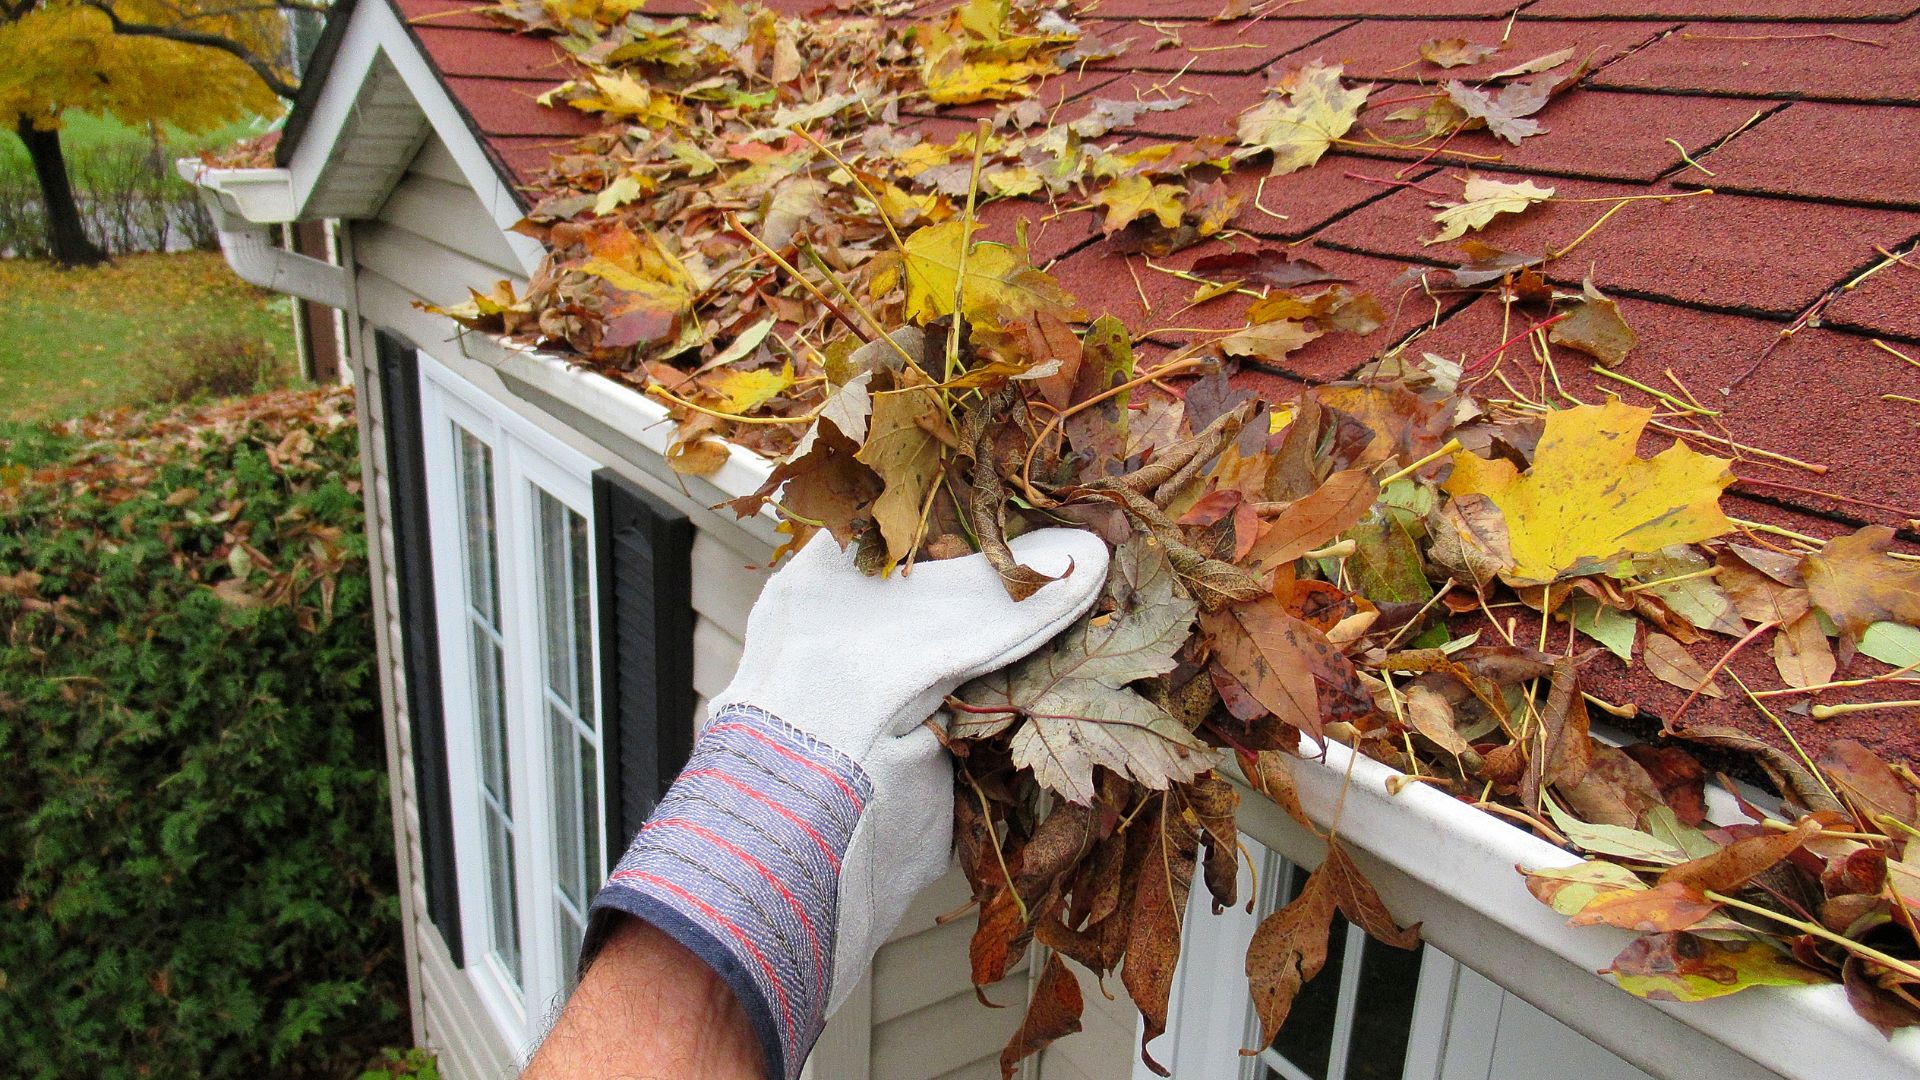 A person wearing gloves cleans leaves and debris from a house gutter as part of preparing the property for winter. This maintenance task helps ensure proper drainage and prevents damage during the colder months.